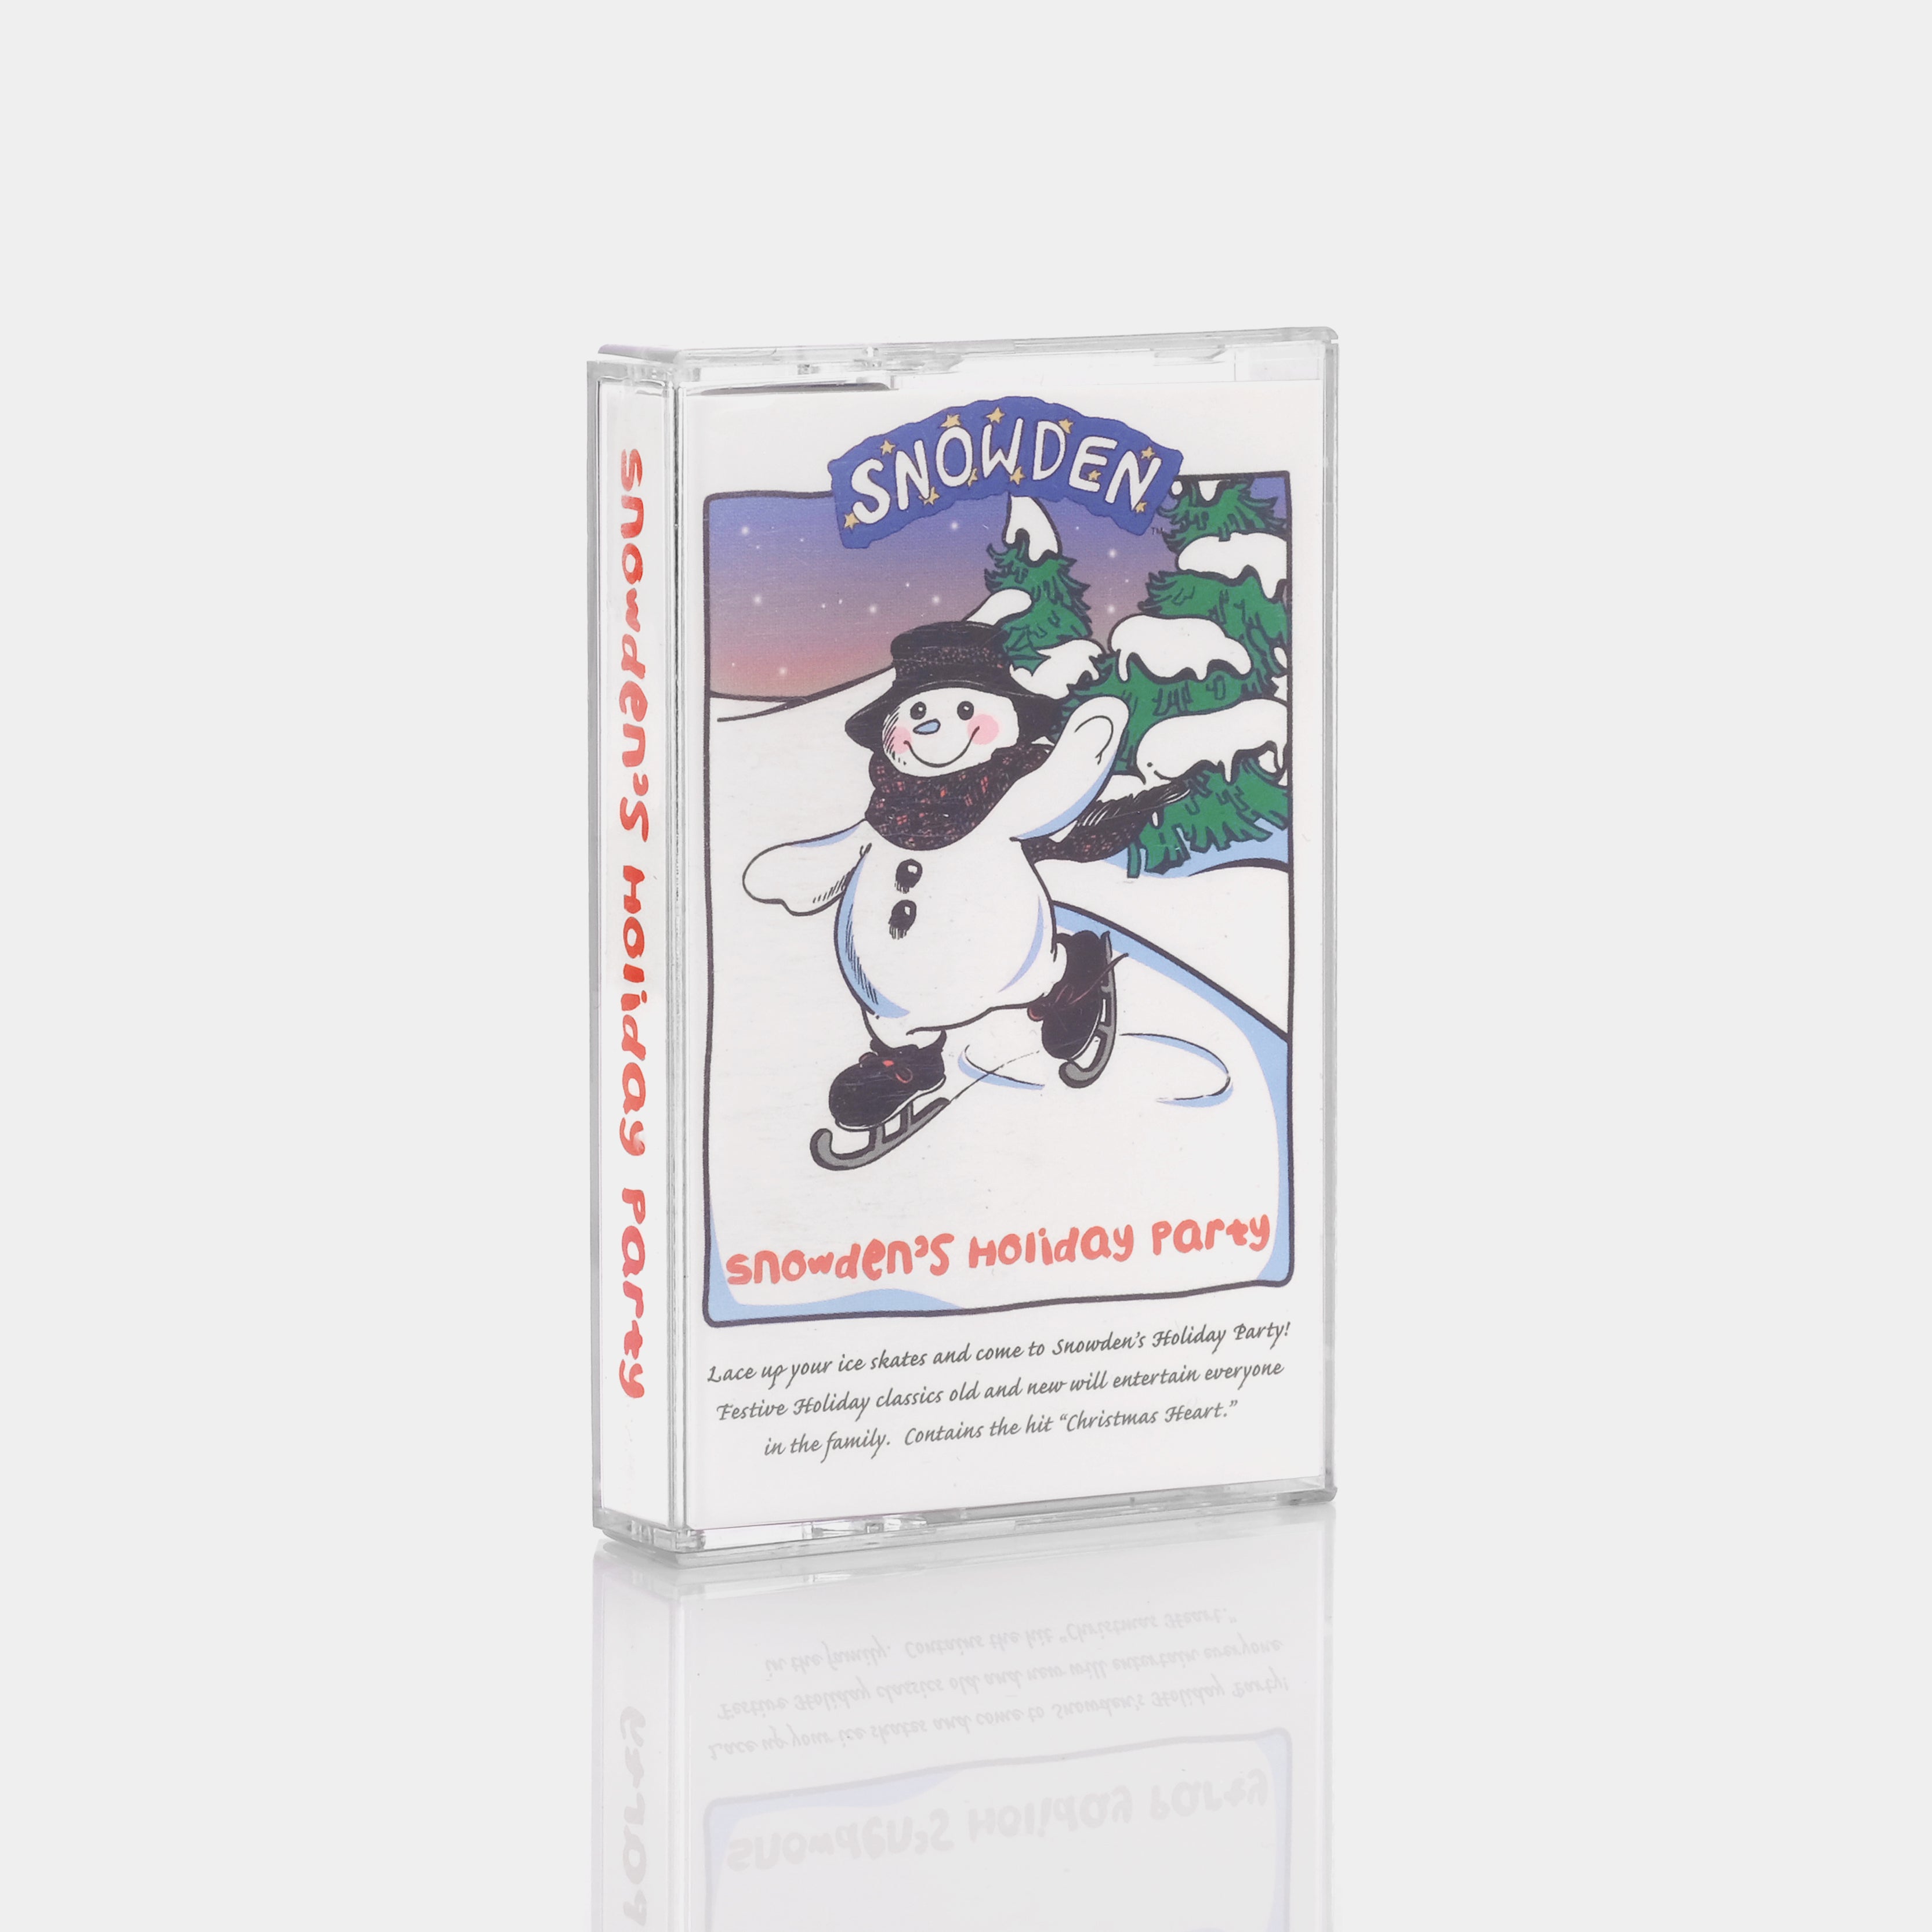 Snowden's Holiday Party Cassette Tape